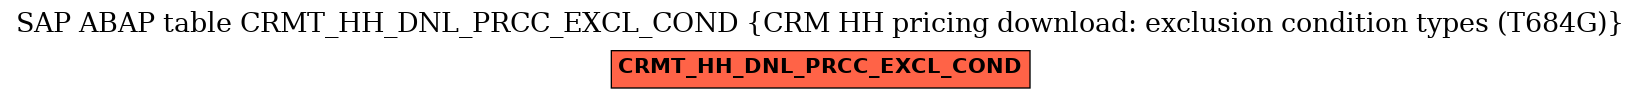 E-R Diagram for table CRMT_HH_DNL_PRCC_EXCL_COND (CRM HH pricing download: exclusion condition types (T684G))